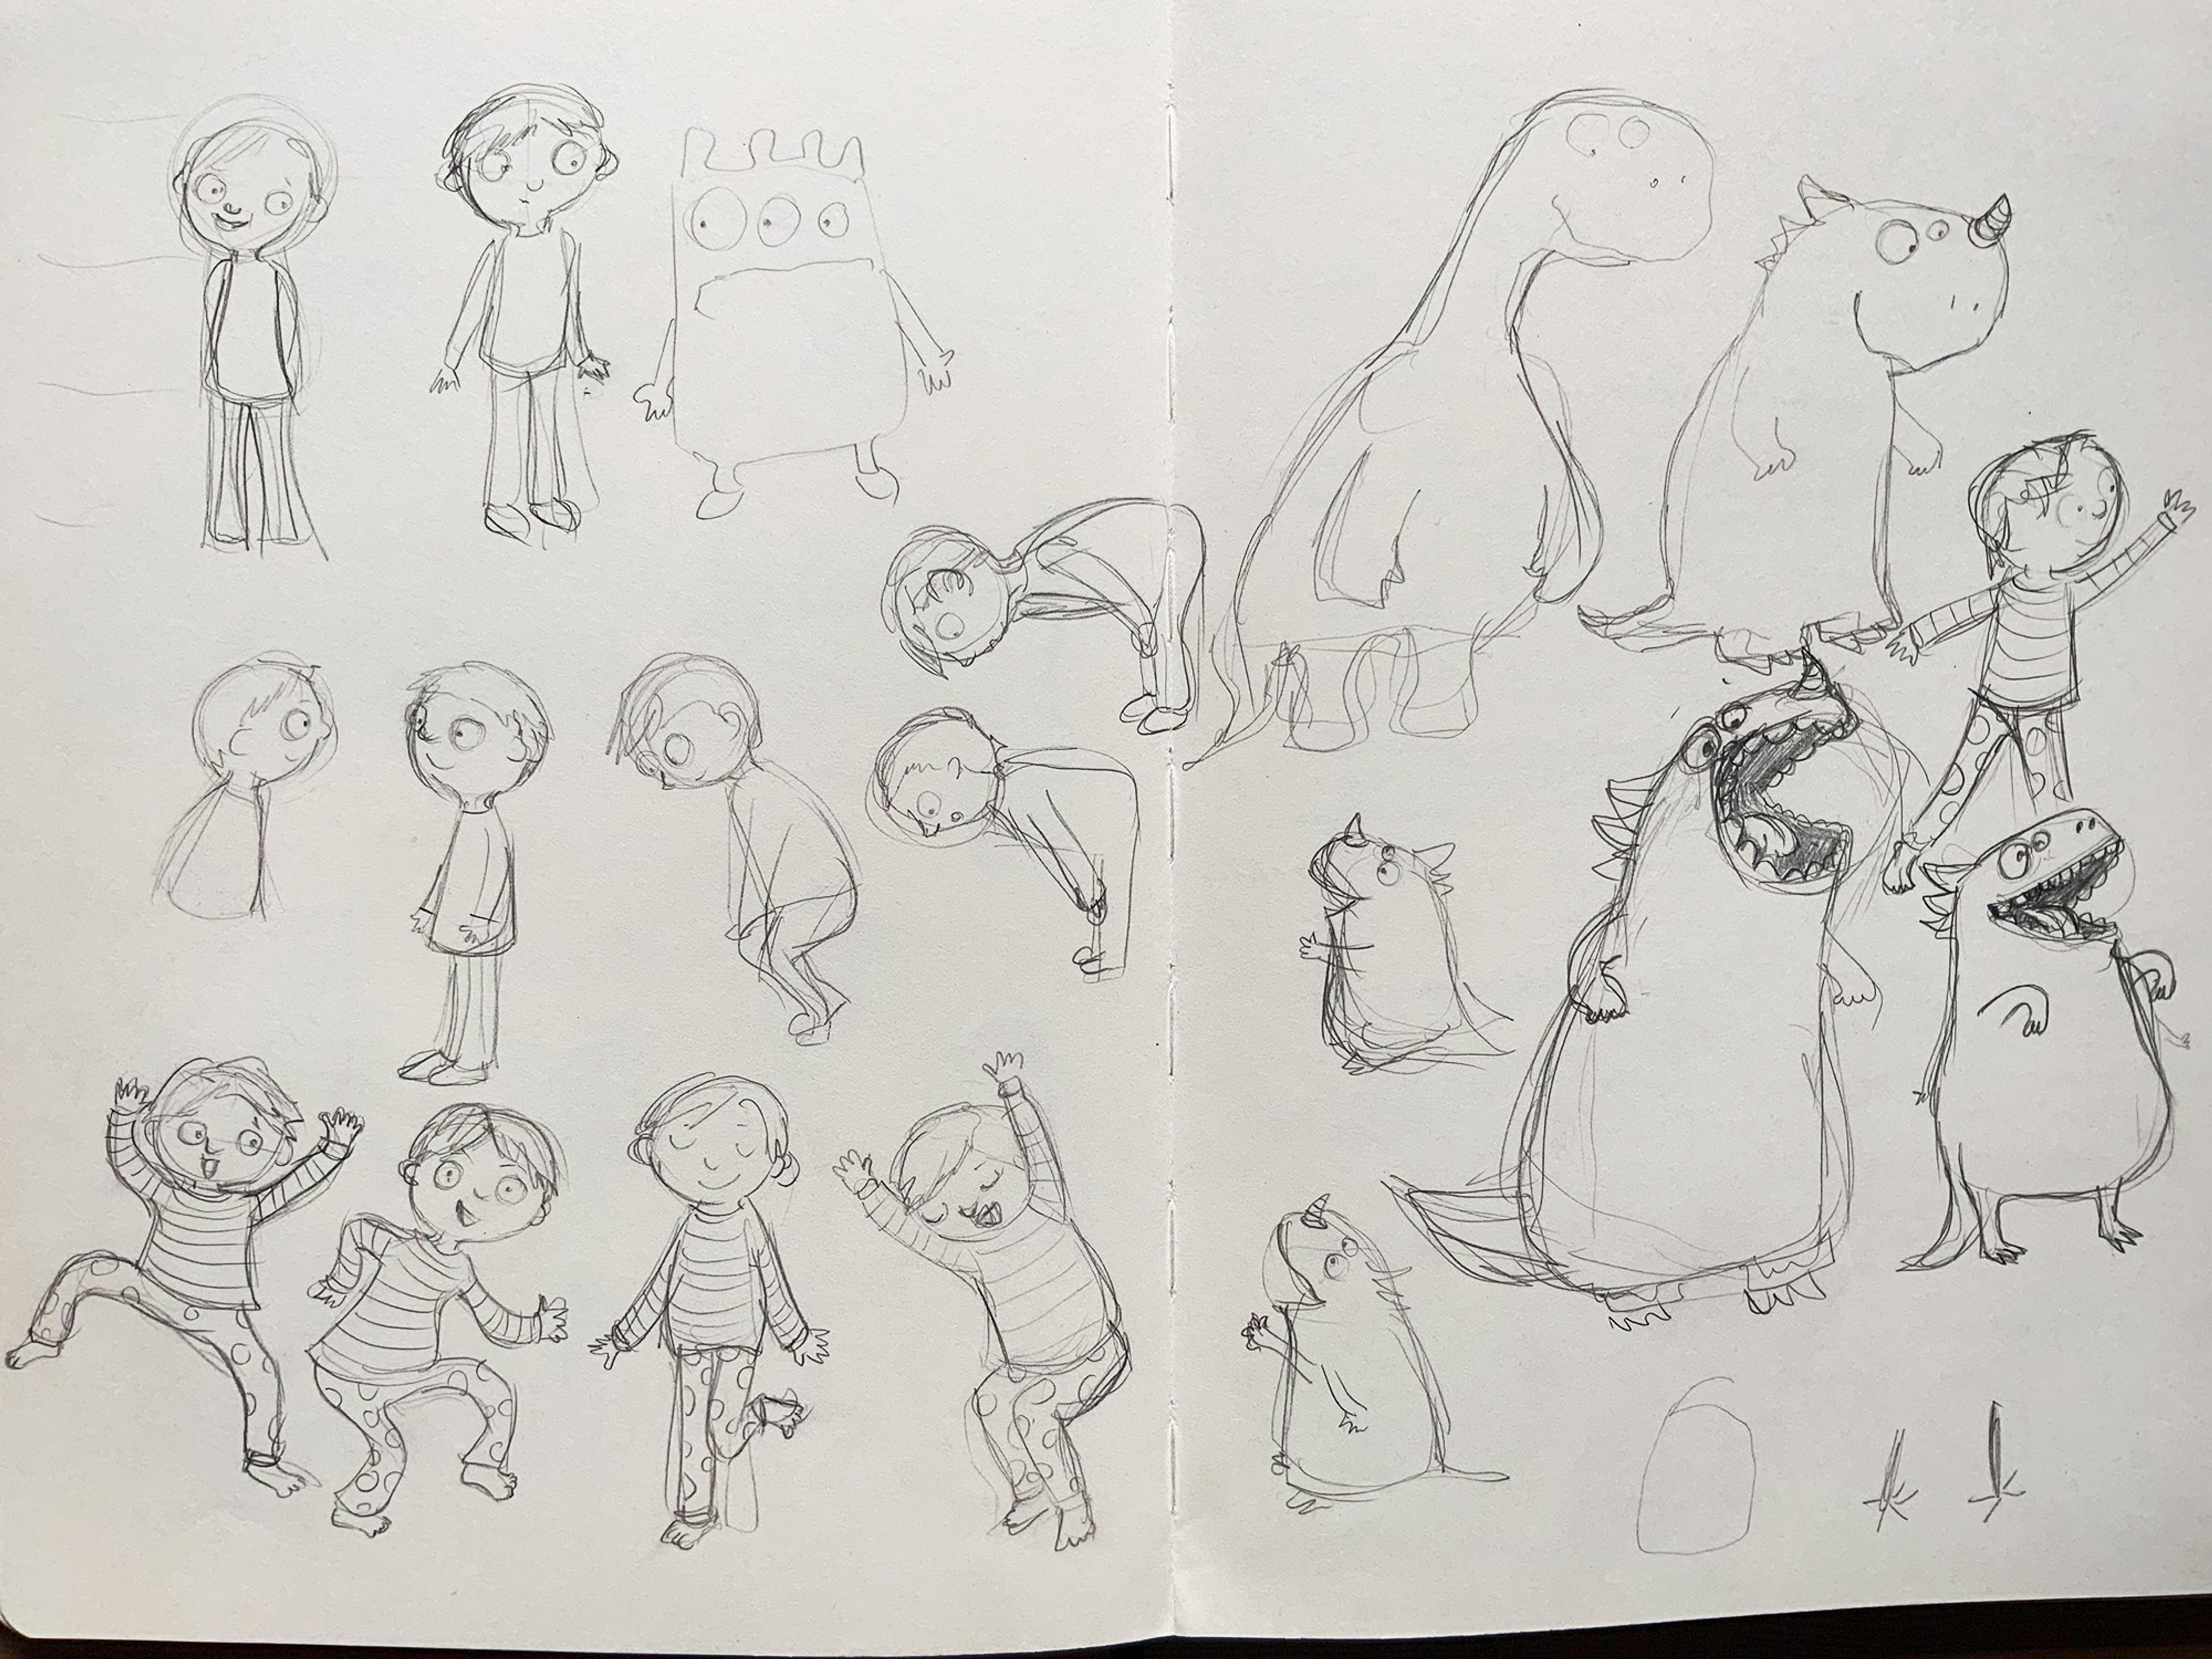 An open sketch book with character drawings drawn on both pages in pencil.